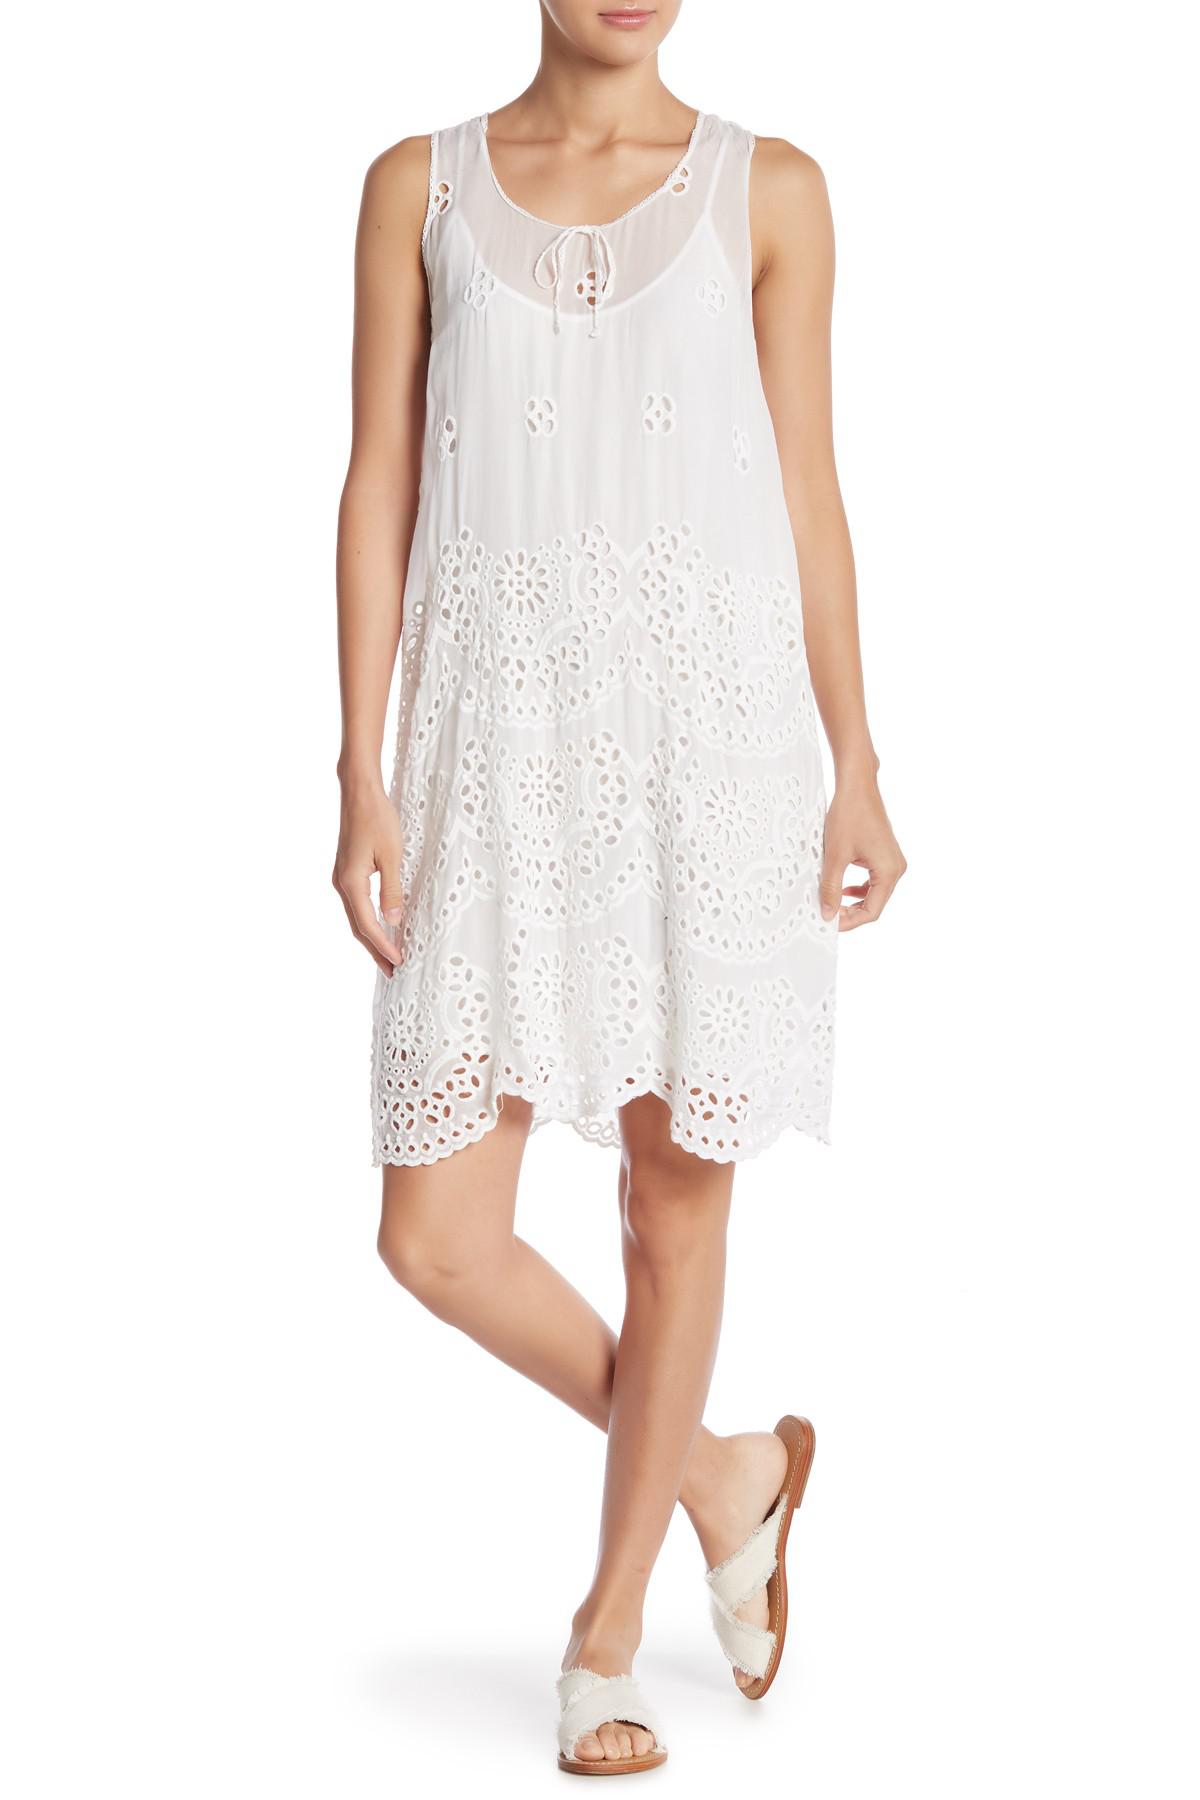 Johnny Was Eyelet Lace Tank Dress in ...